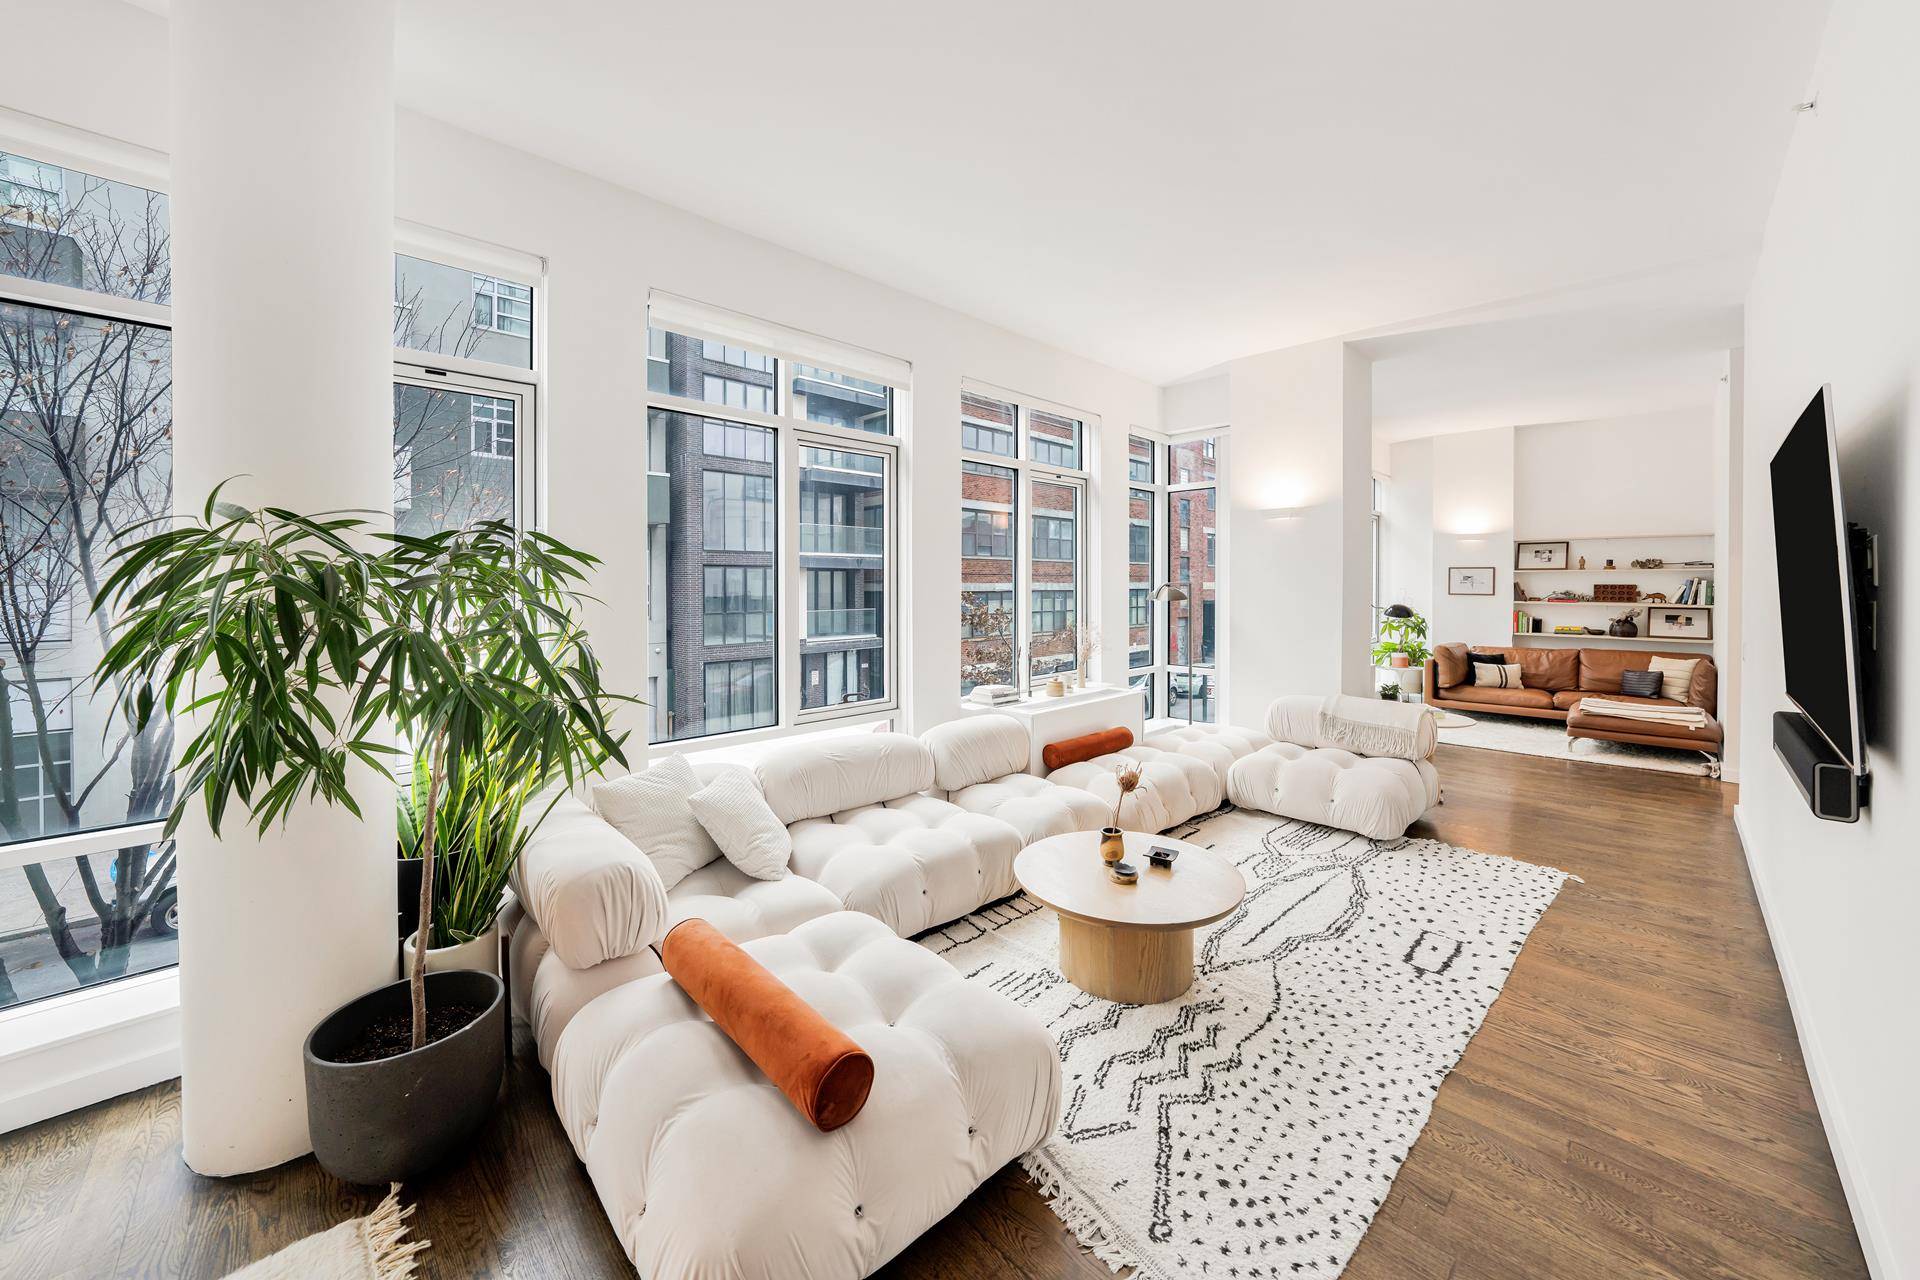 Step into the extraordinary at 101 North 5th Street, Unit 2AB, where dramatic luxury meets impeccable design.